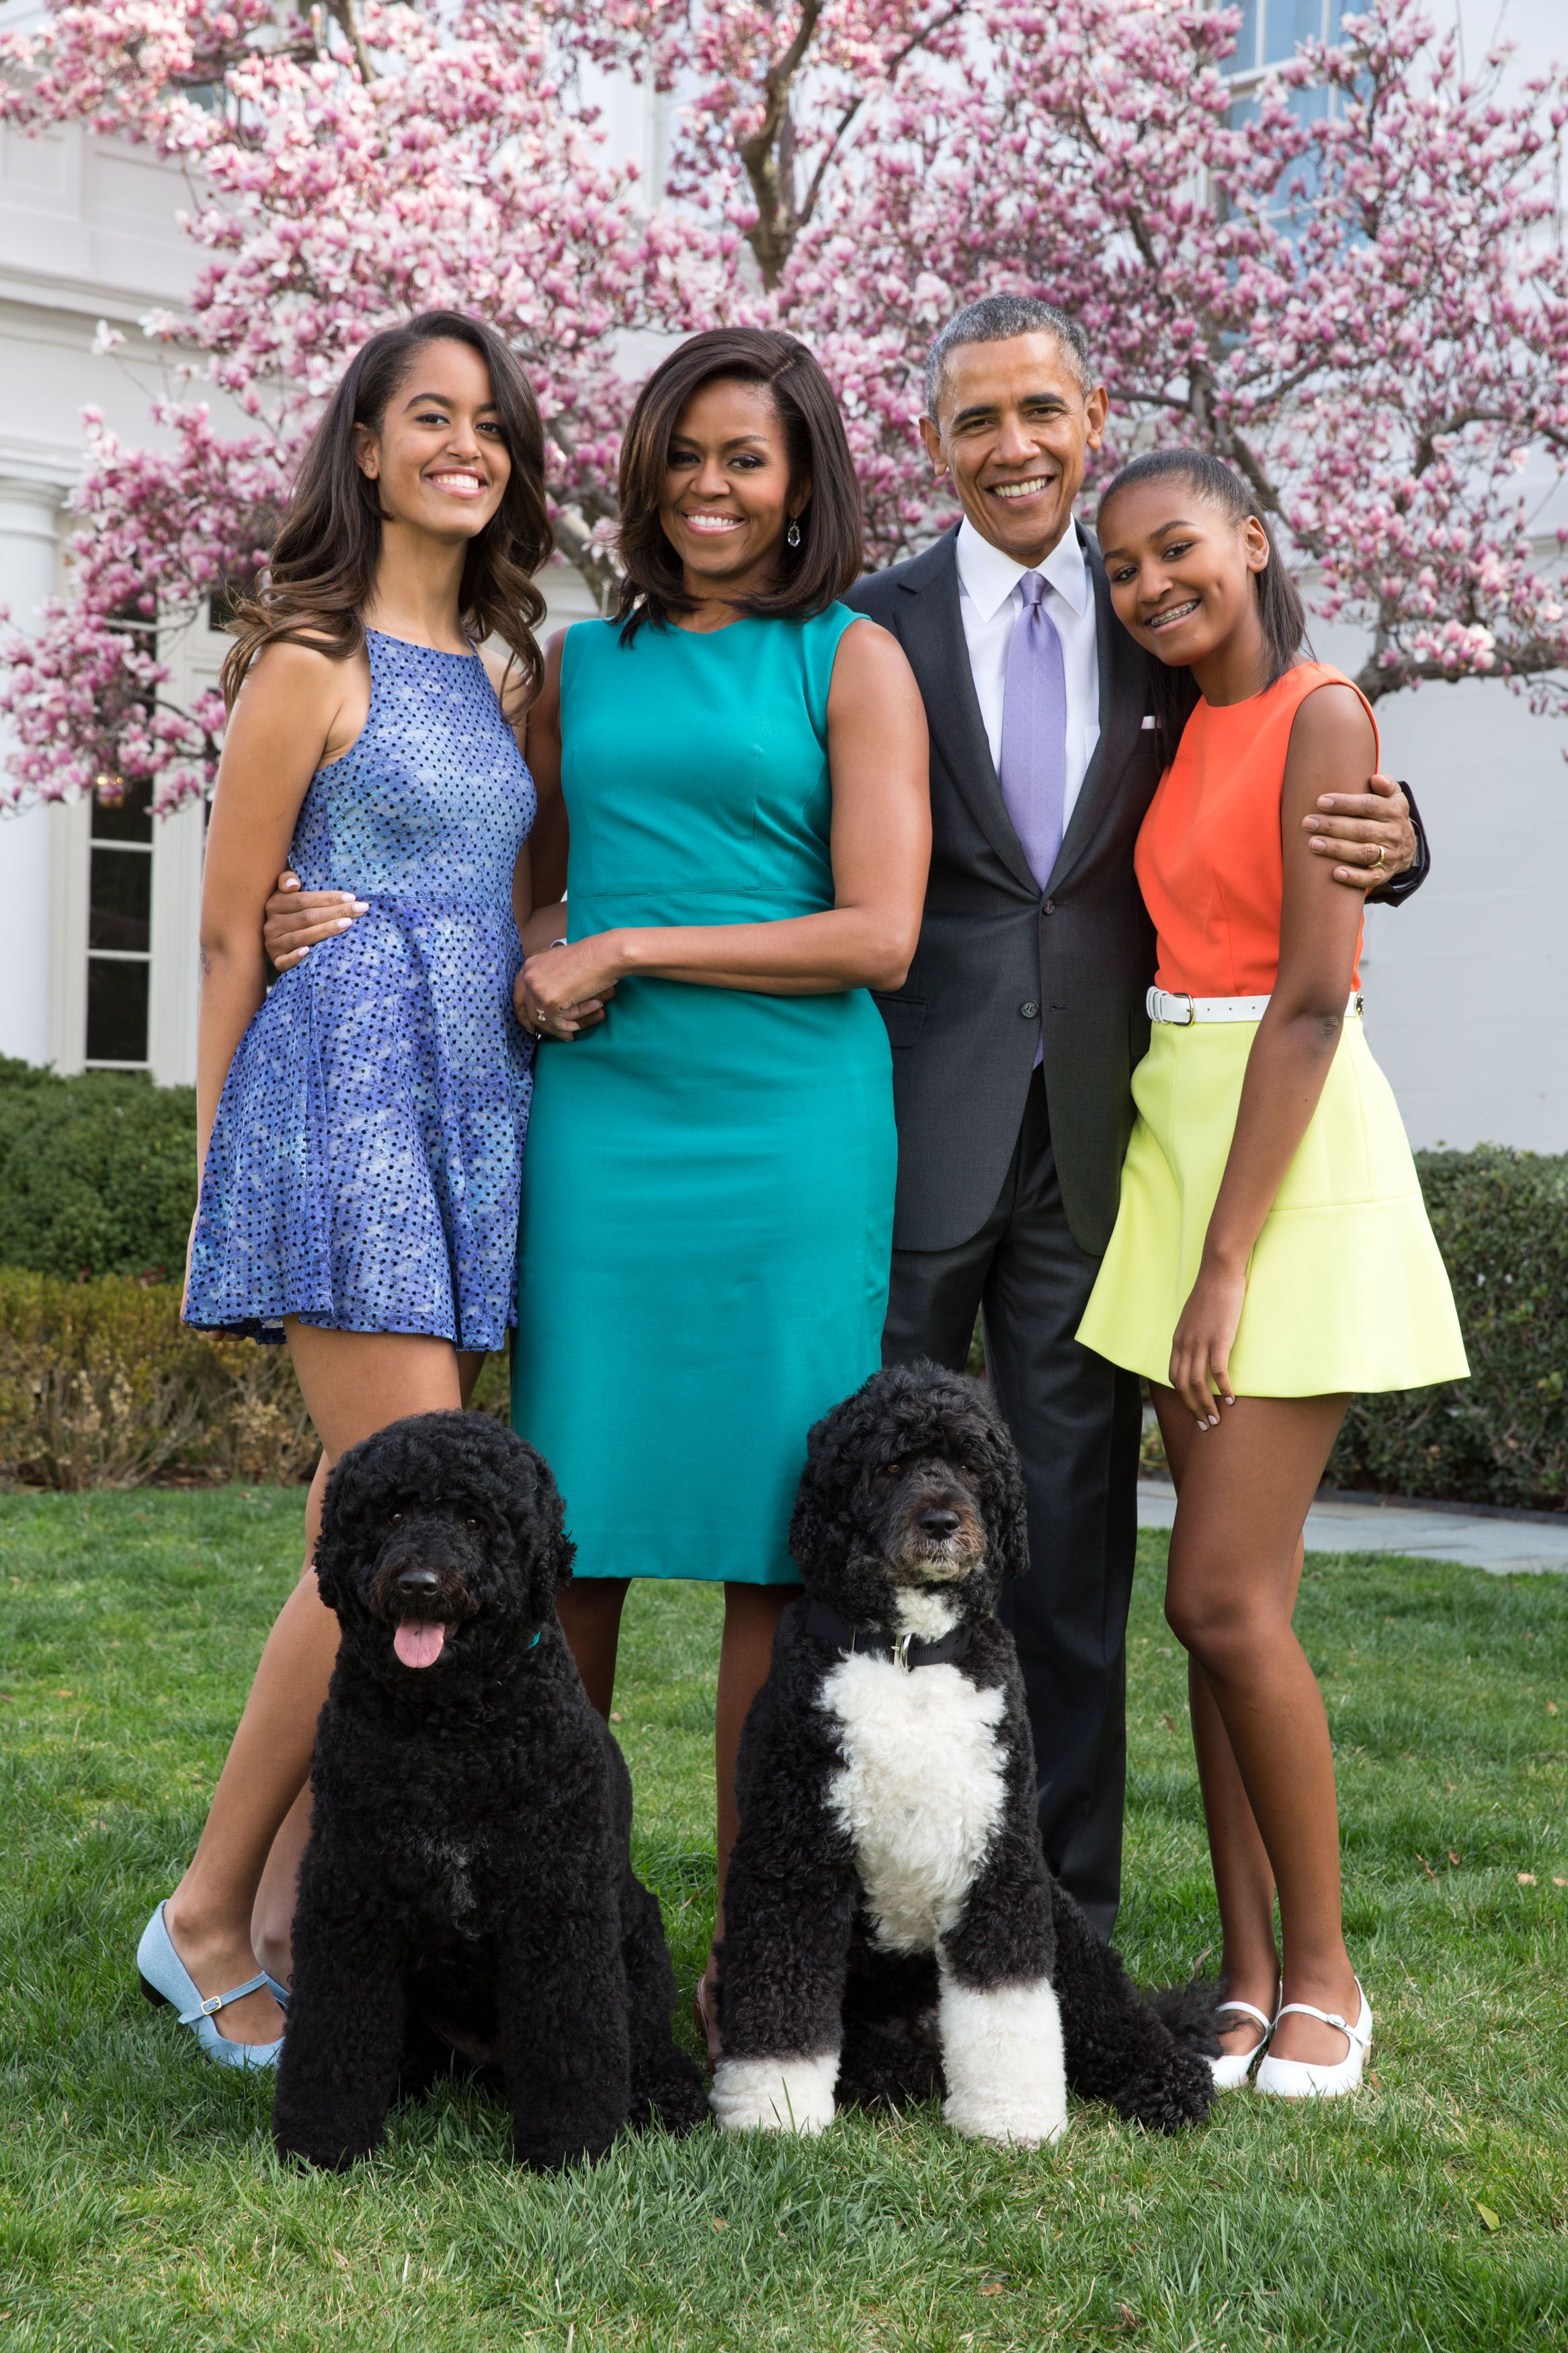 Presidential family Malia, Michelle, Barrack, and Sasha Obama pose for a family portrait with their dogs Bo and Sunny in the White House Rose Garden on April 5, 2015, in Washington, DC. | Photo: Pete Souza/The White House/ Getty Images